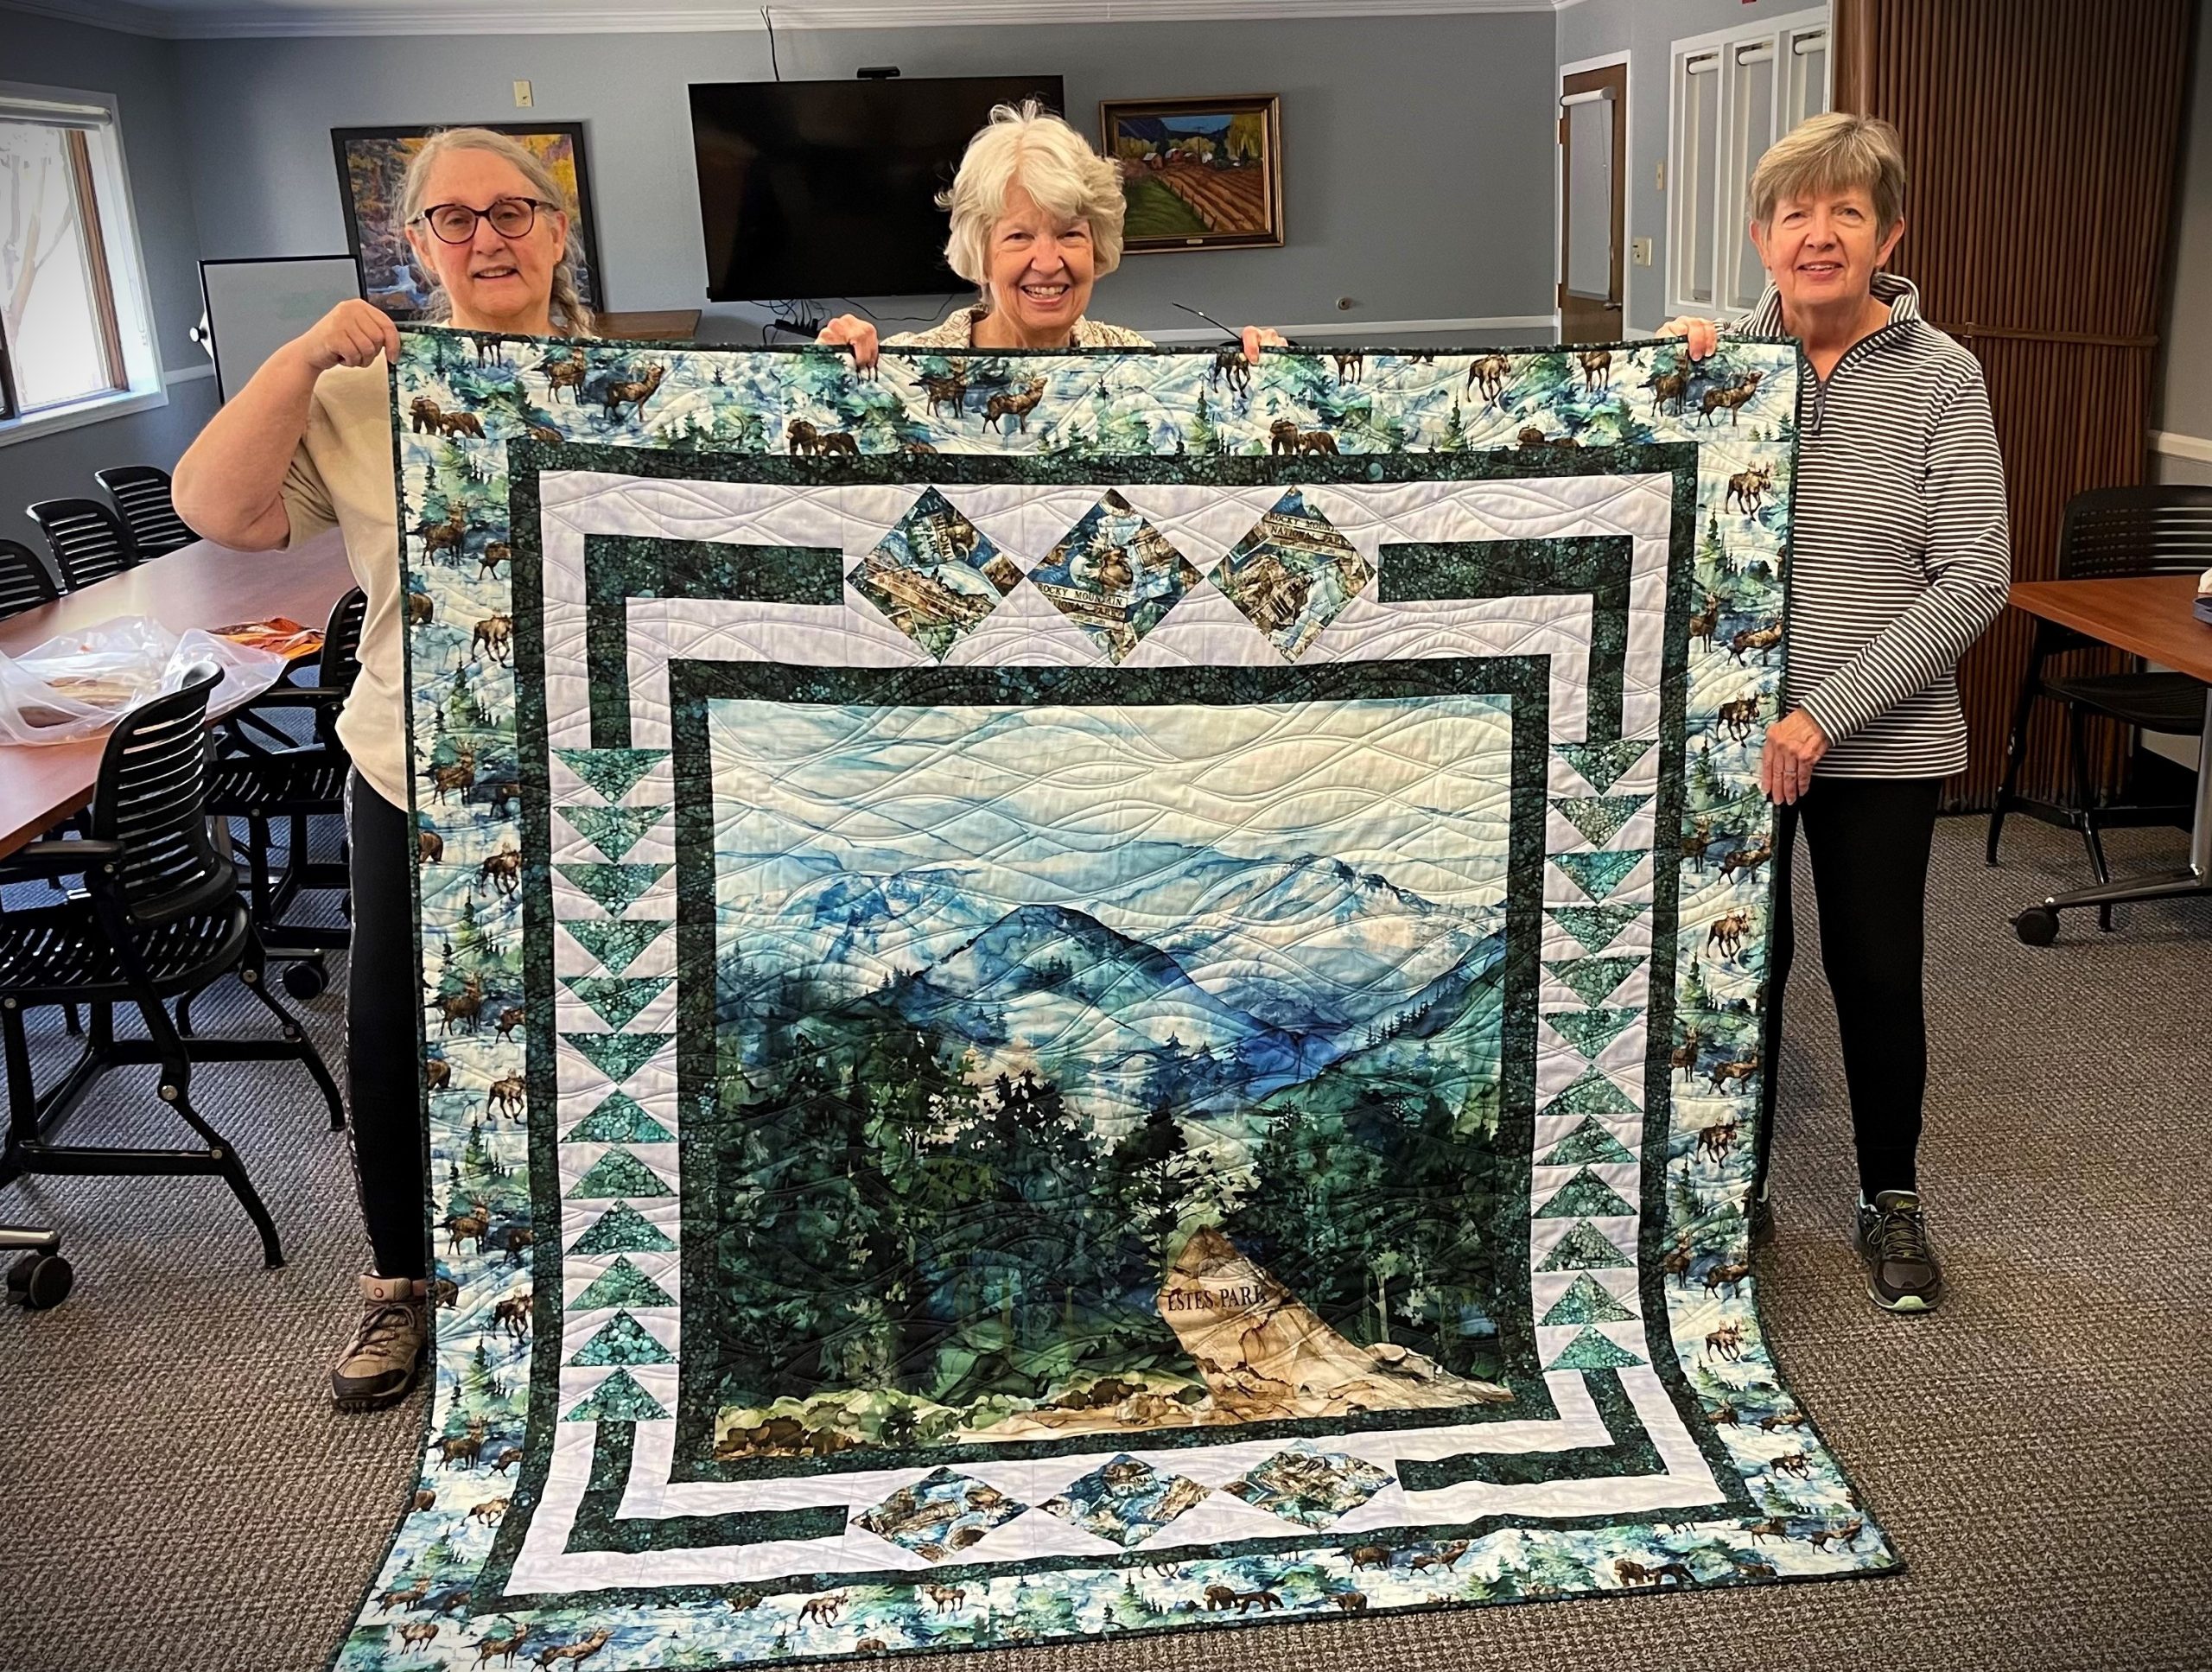 Three women hold up a large quilt featuring a mountain landscape with a trail. The setting appears to be a room with tables and chairs.